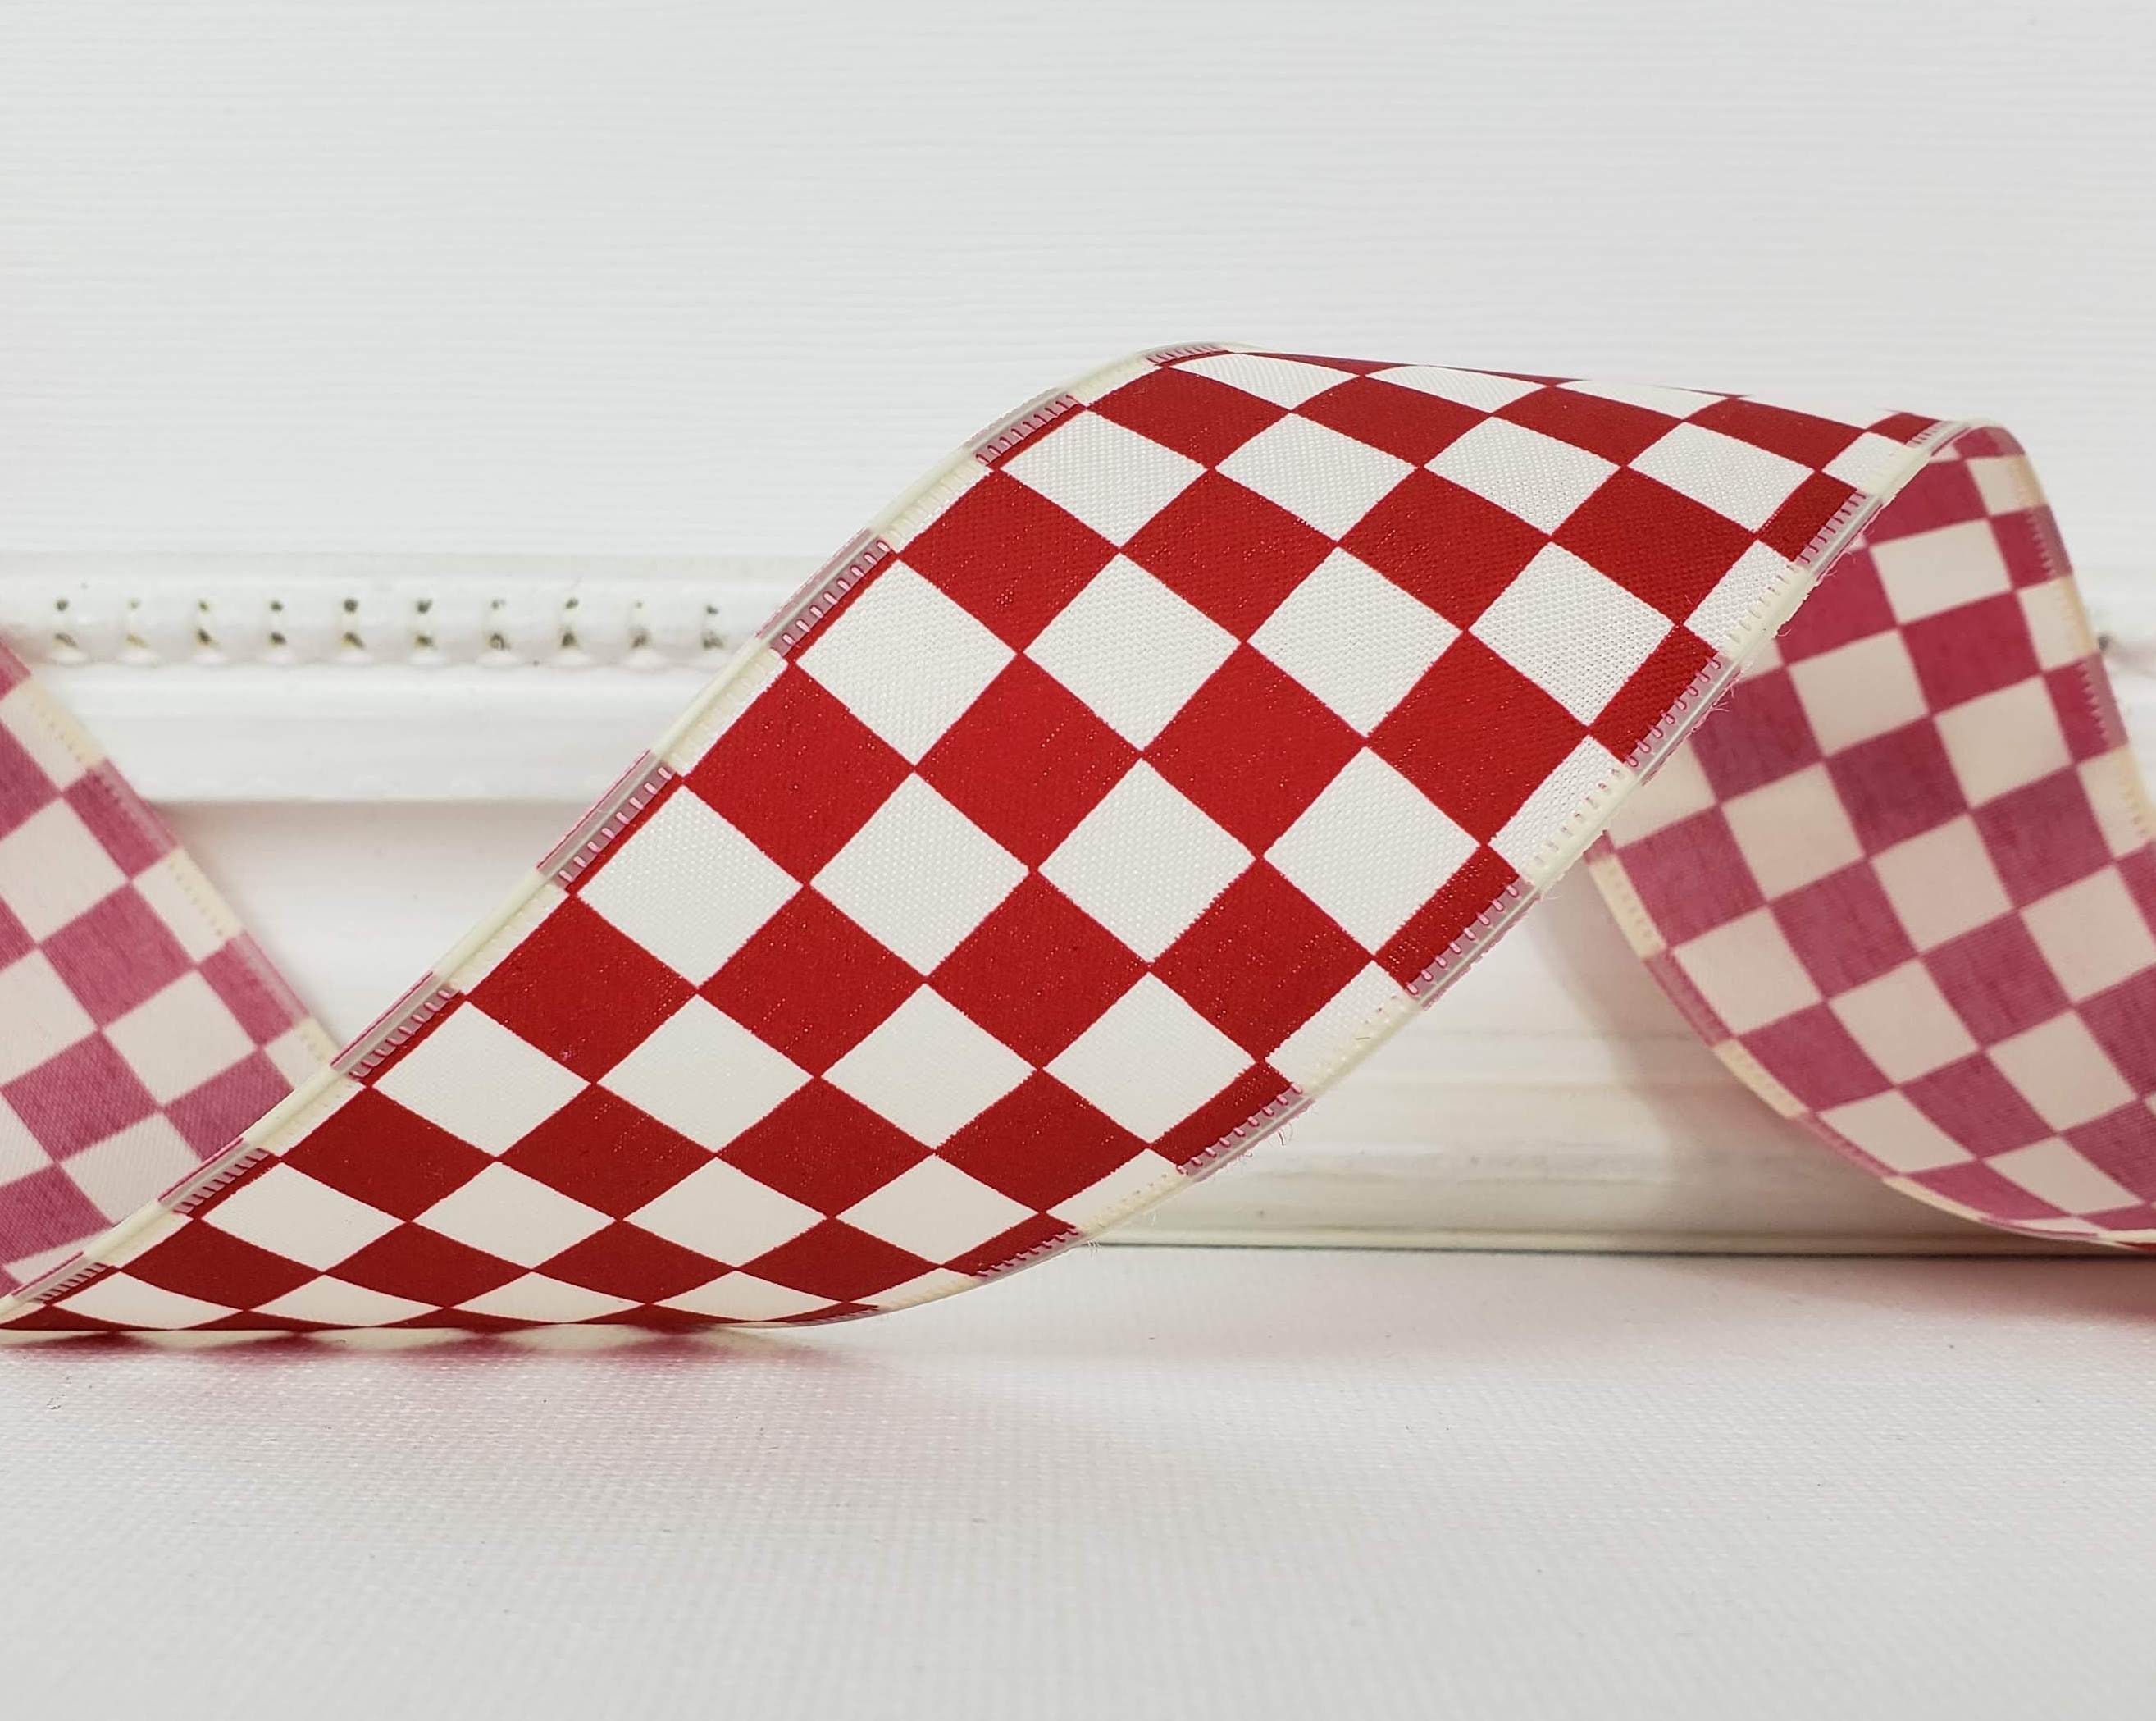 Wired Red Gingham Ribbon, Red White Gingham Check Ribbon for